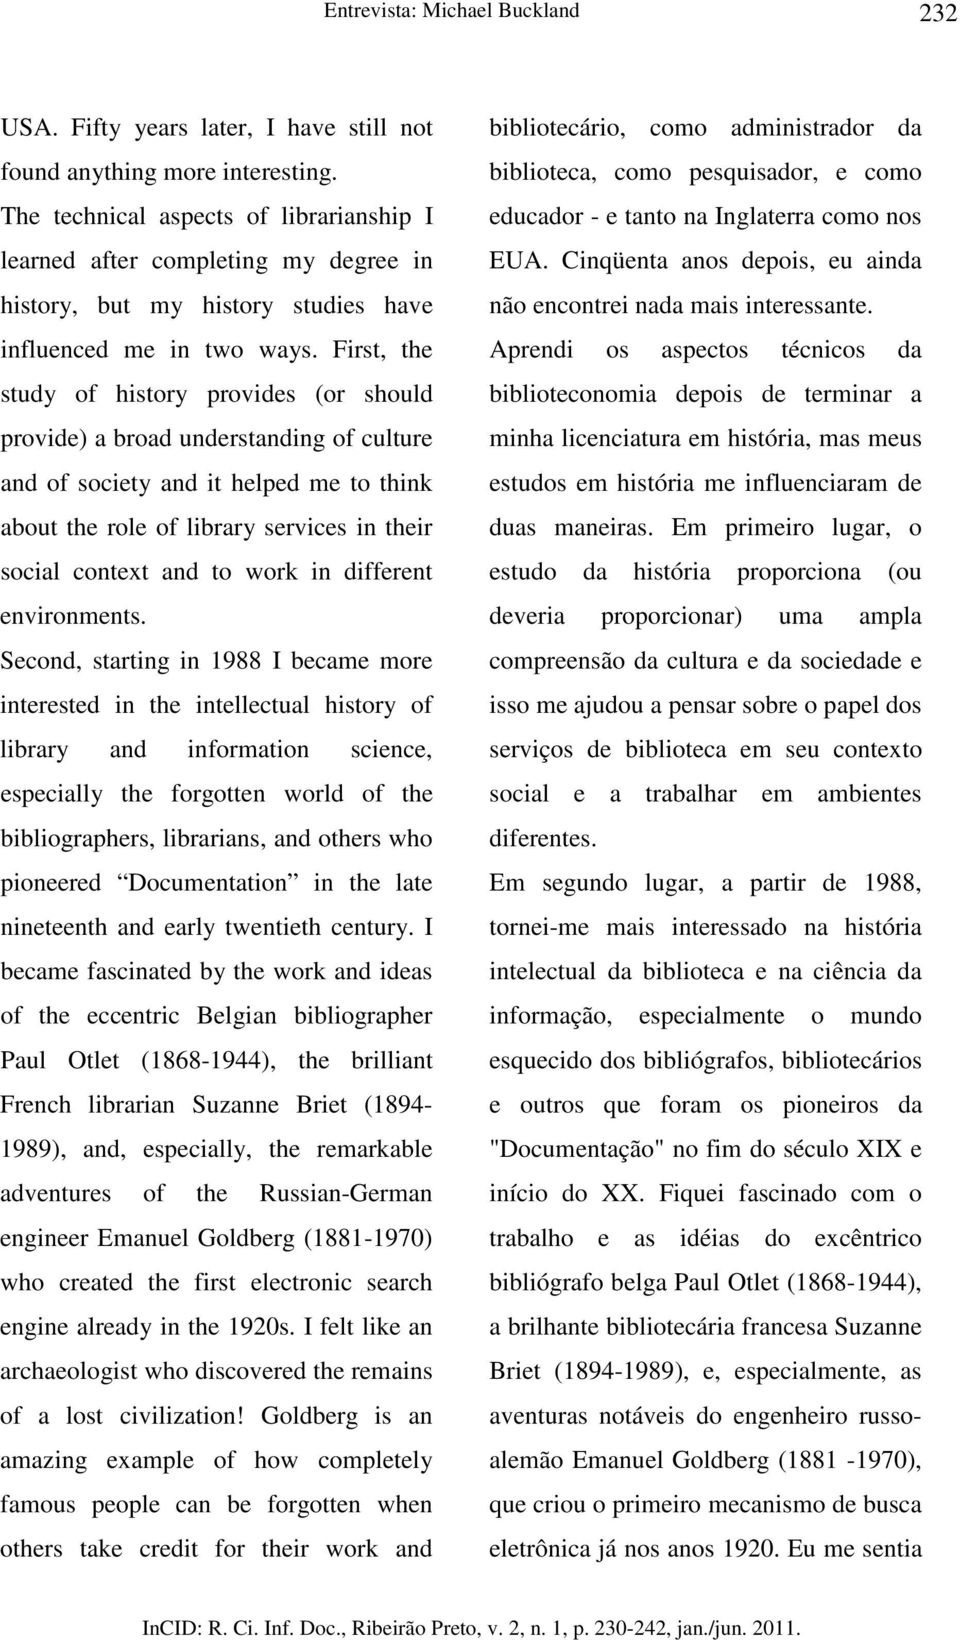 First, the study of history provides (or should provide) a broad understanding of culture and of society and it helped me to think about the role of library services in their social context and to